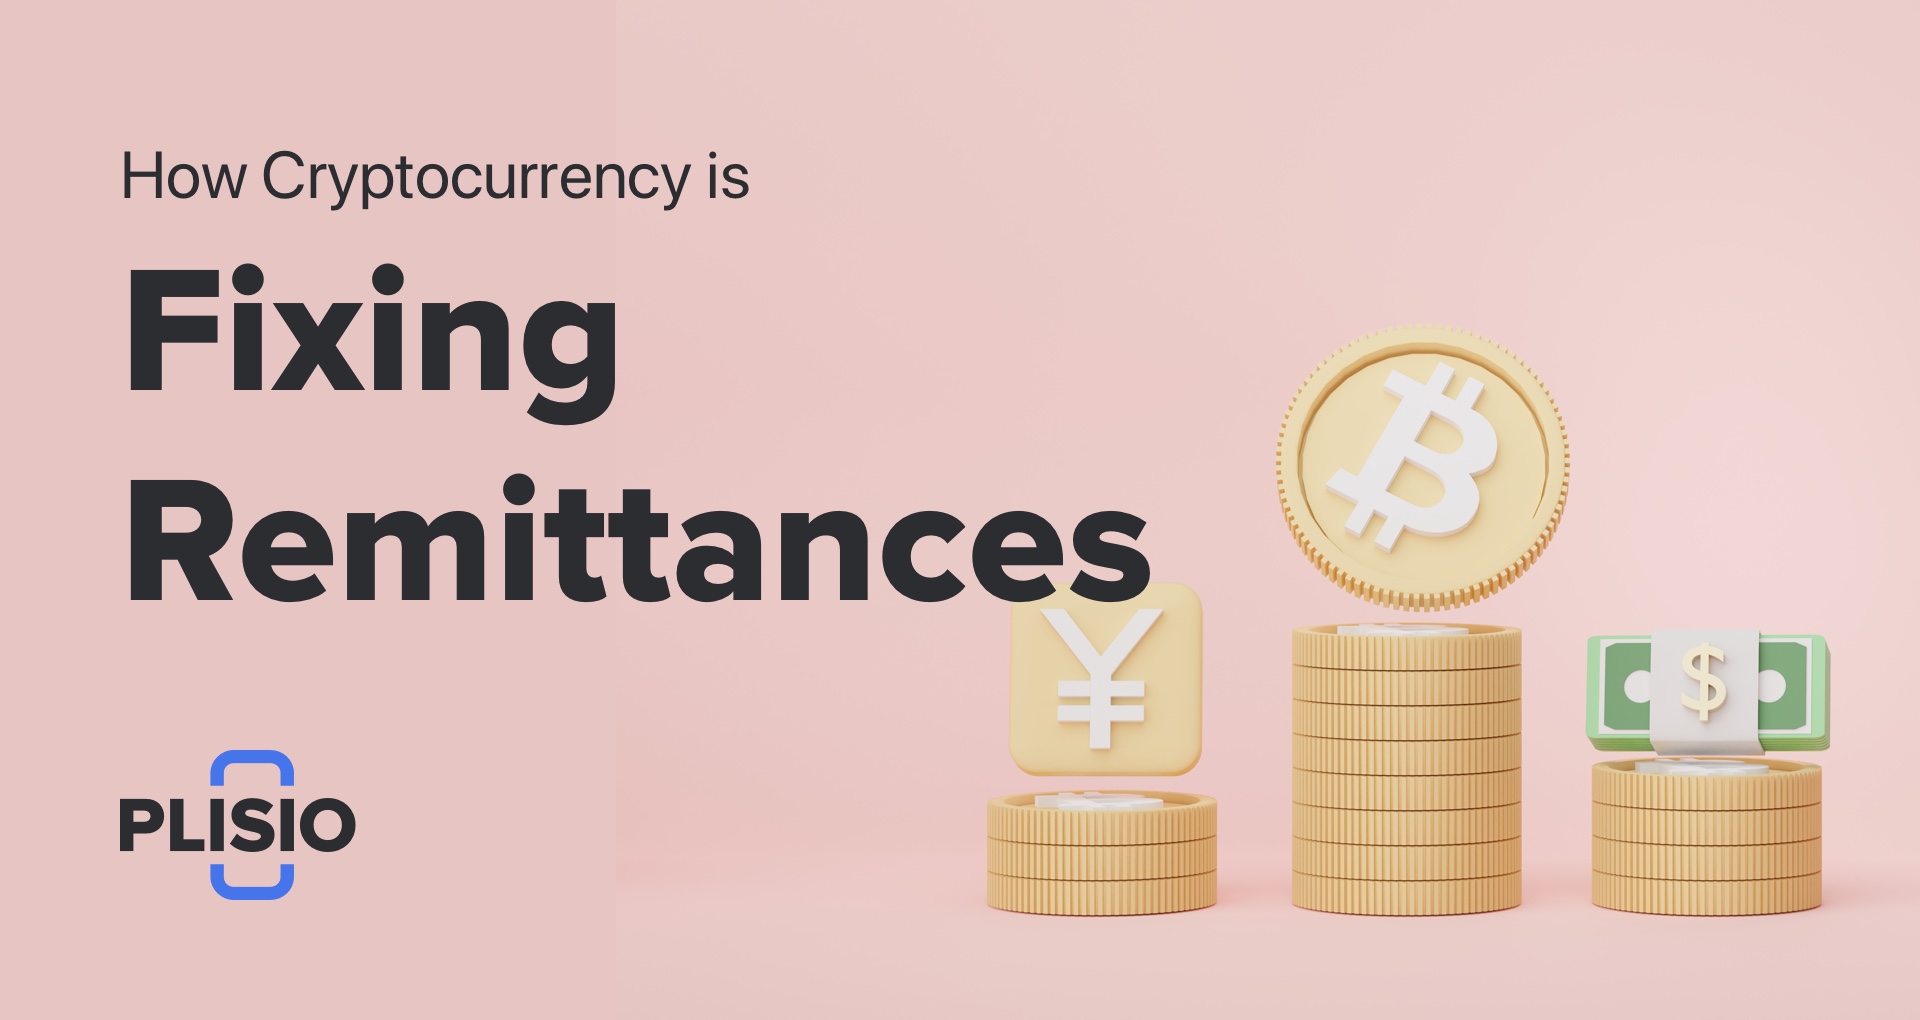 How Cryptocurrency is Fixing Remittances